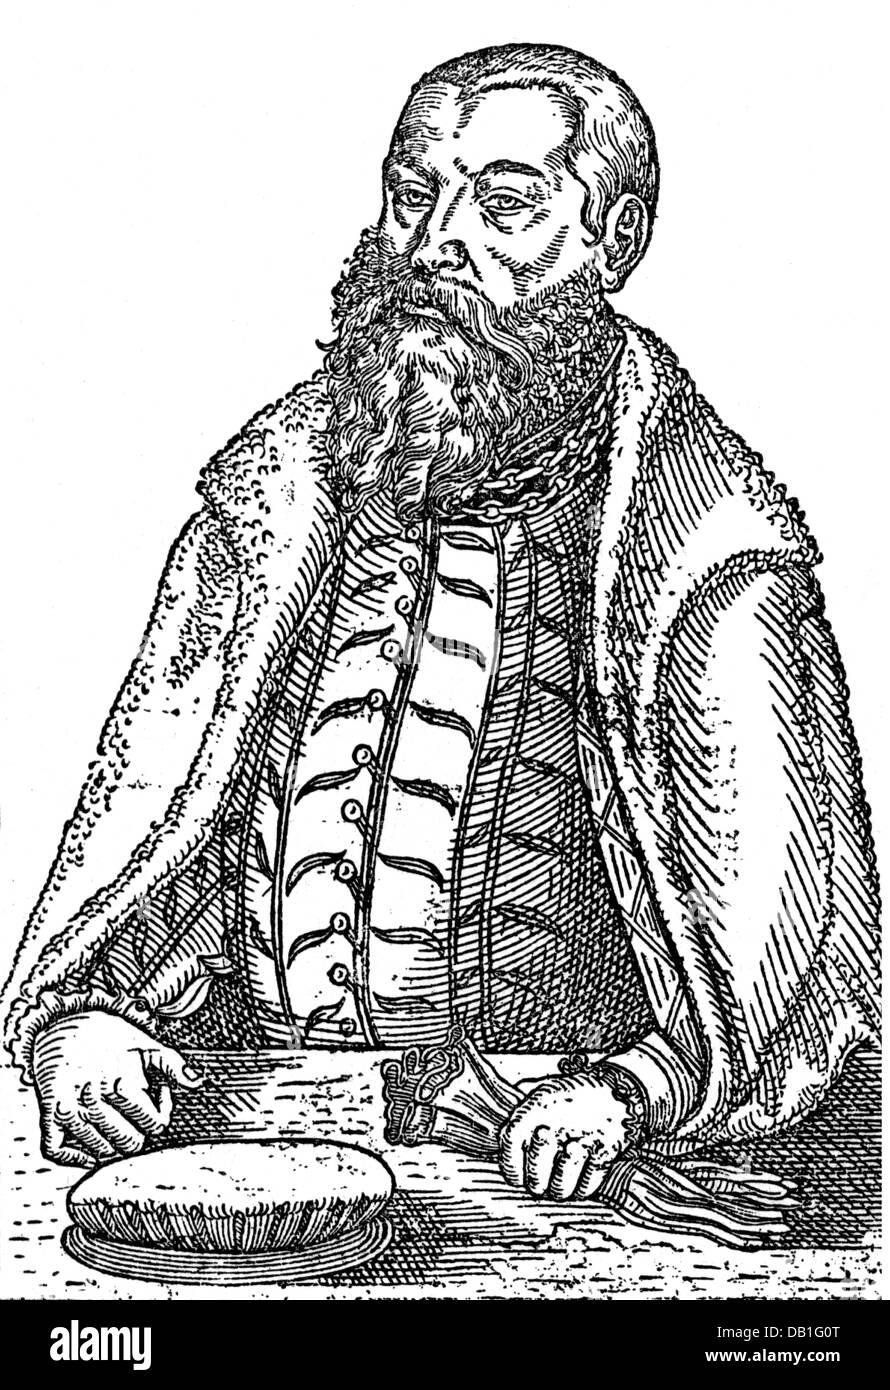 Maurice, 21.3.1521 - 11.7.1553, Prince-Elector of Saxony 18.8.1547 - 11.7.1553, half length, after woodcut from the Cranach studio, wood engraving, 19th century, Stock Photo